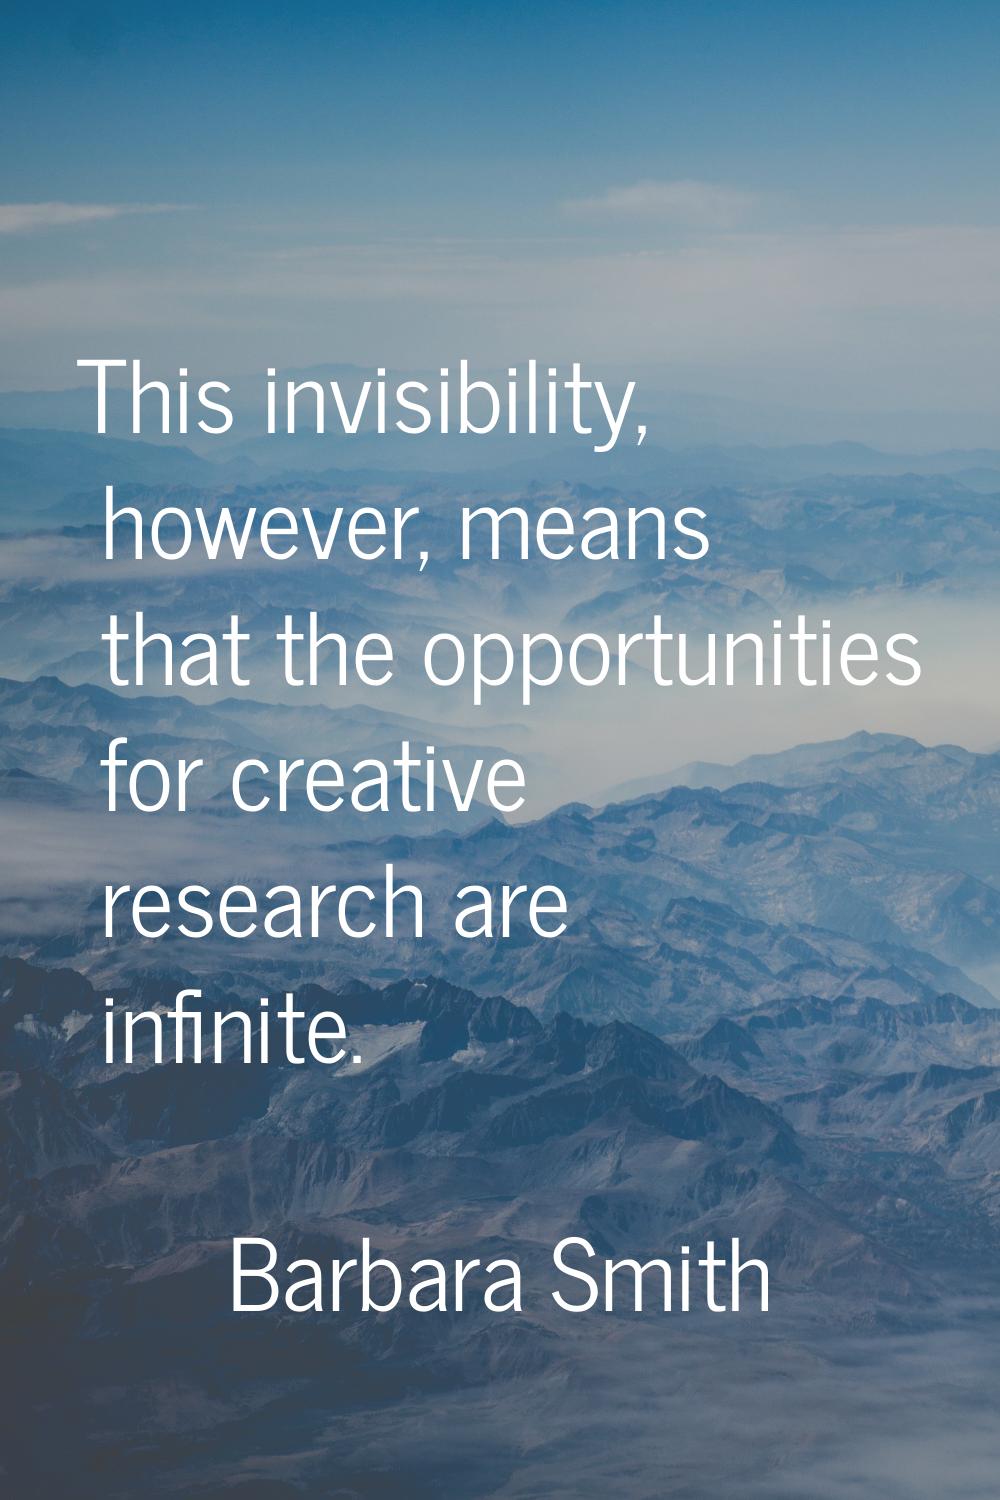 This invisibility, however, means that the opportunities for creative research are infinite.